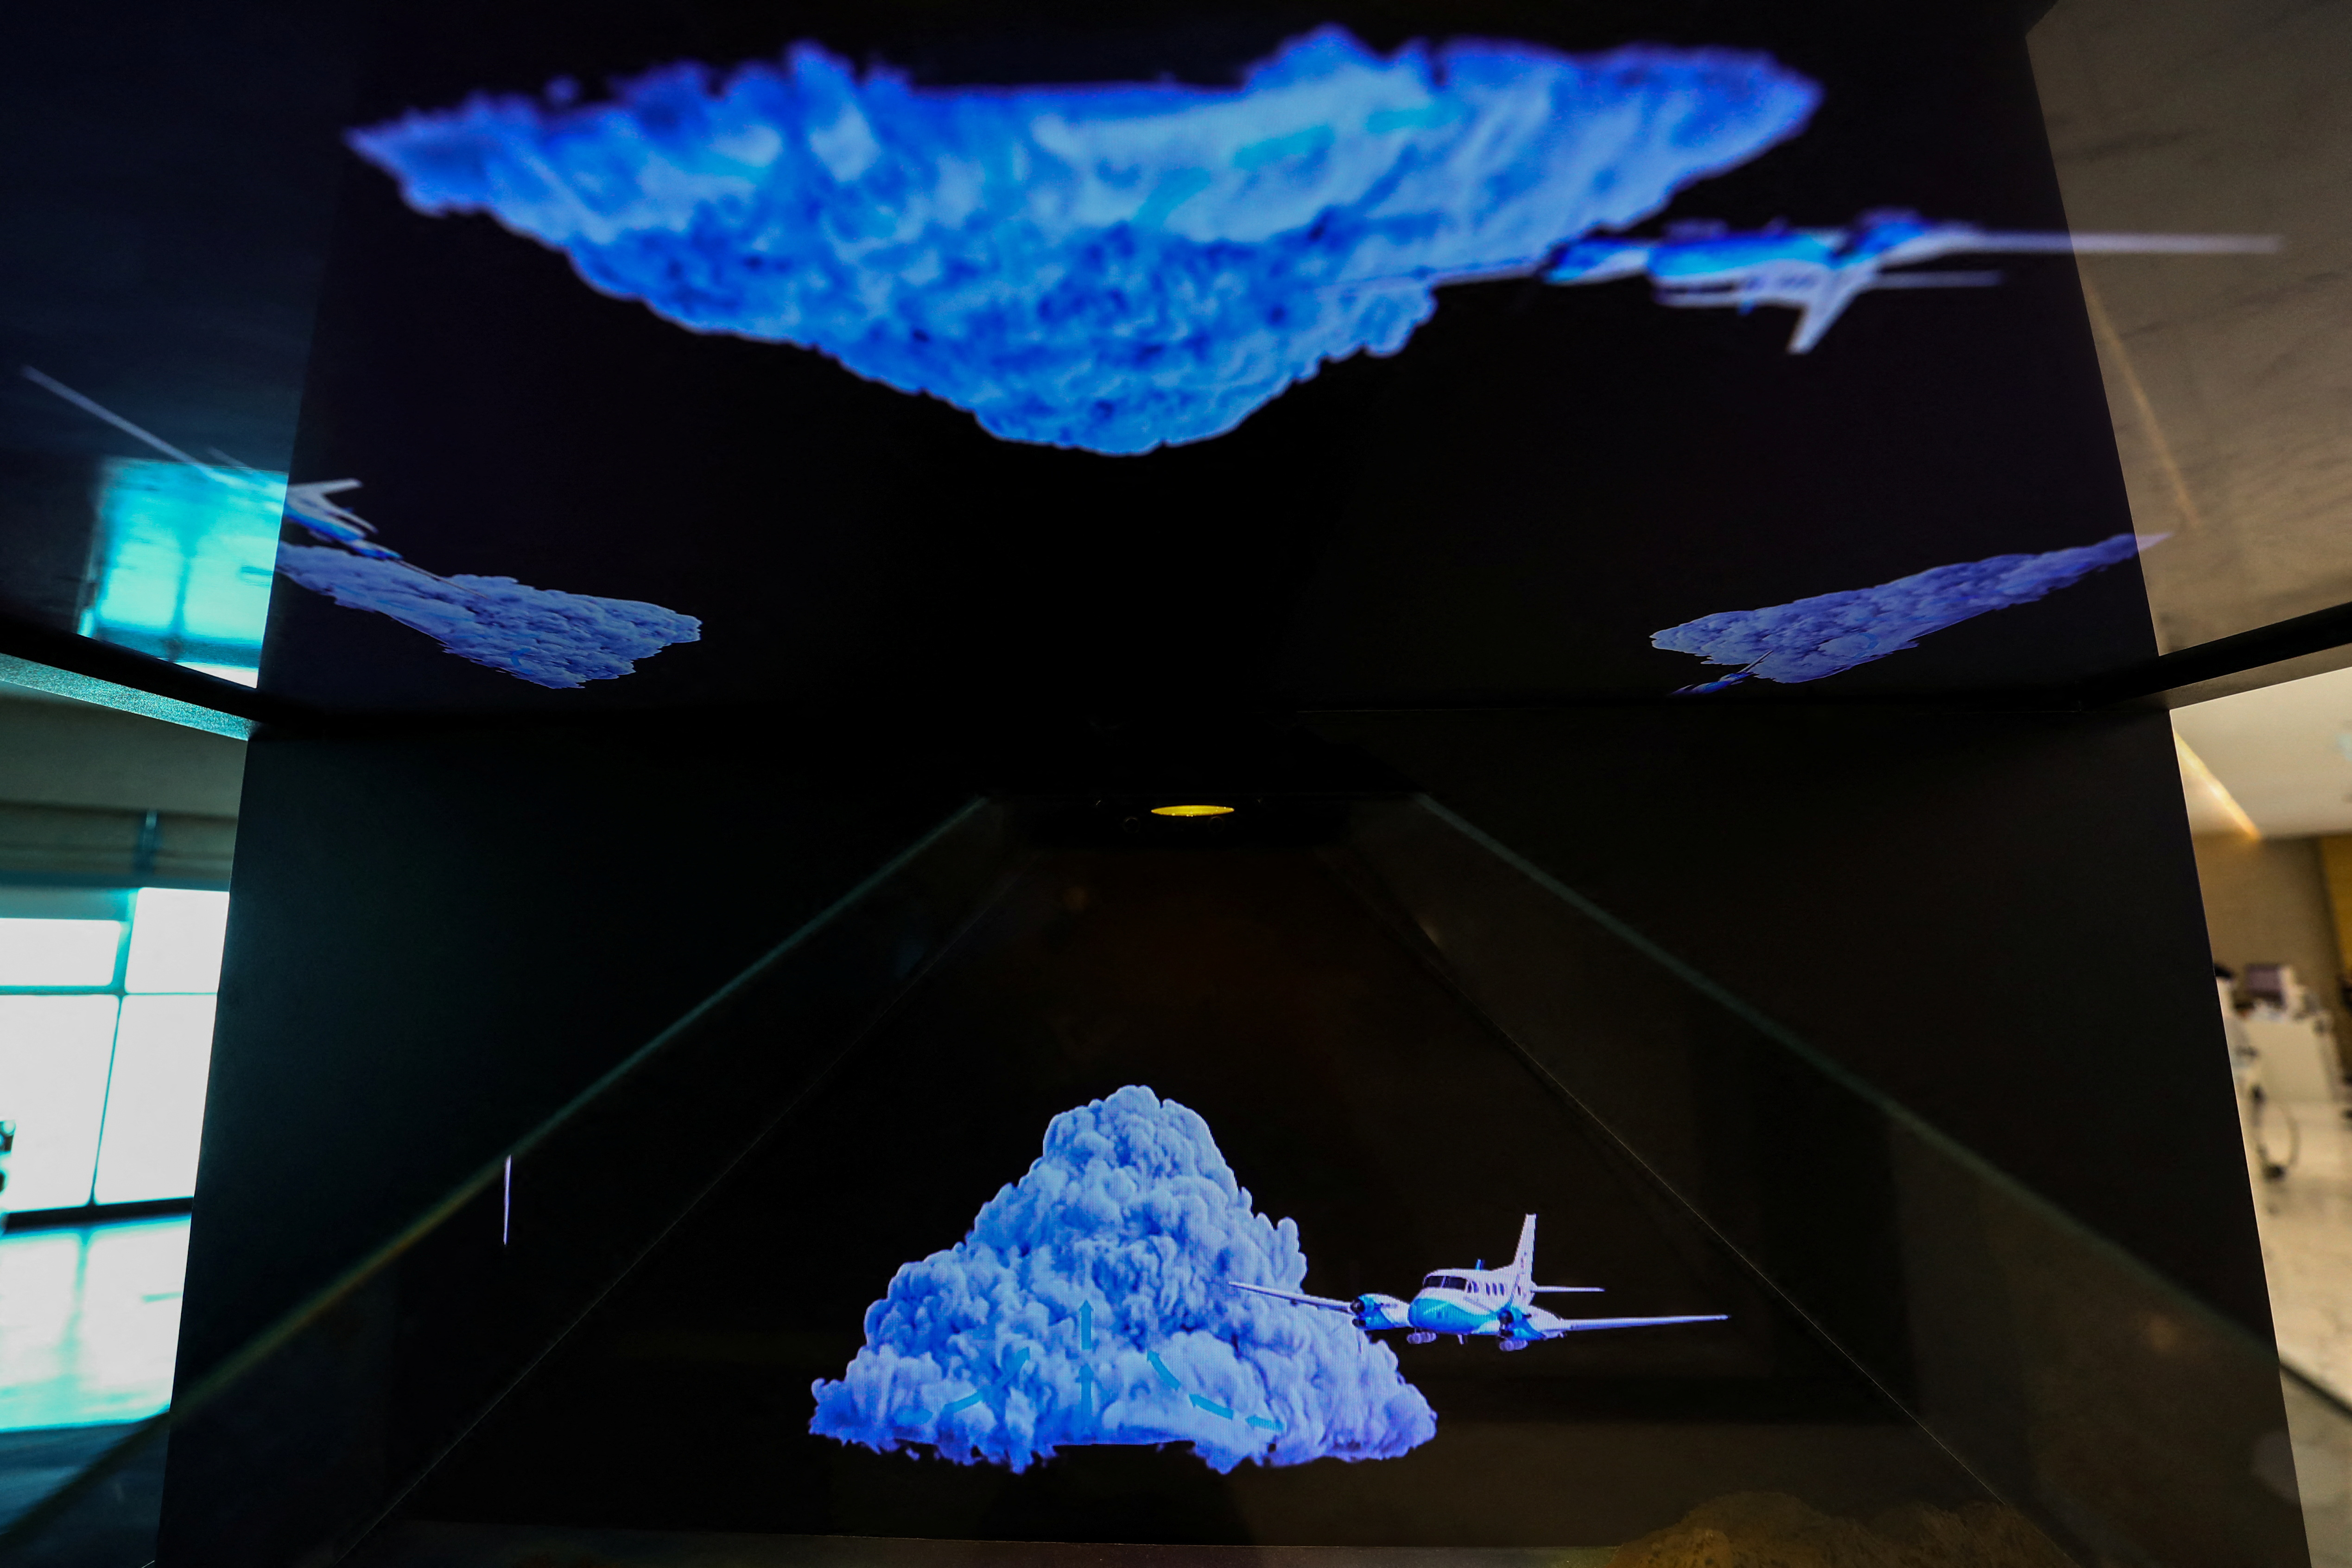 An explanatory hologram of the cloud seeding process is seen inside the control room at the National Center of Meteorology in Abu Dhabi